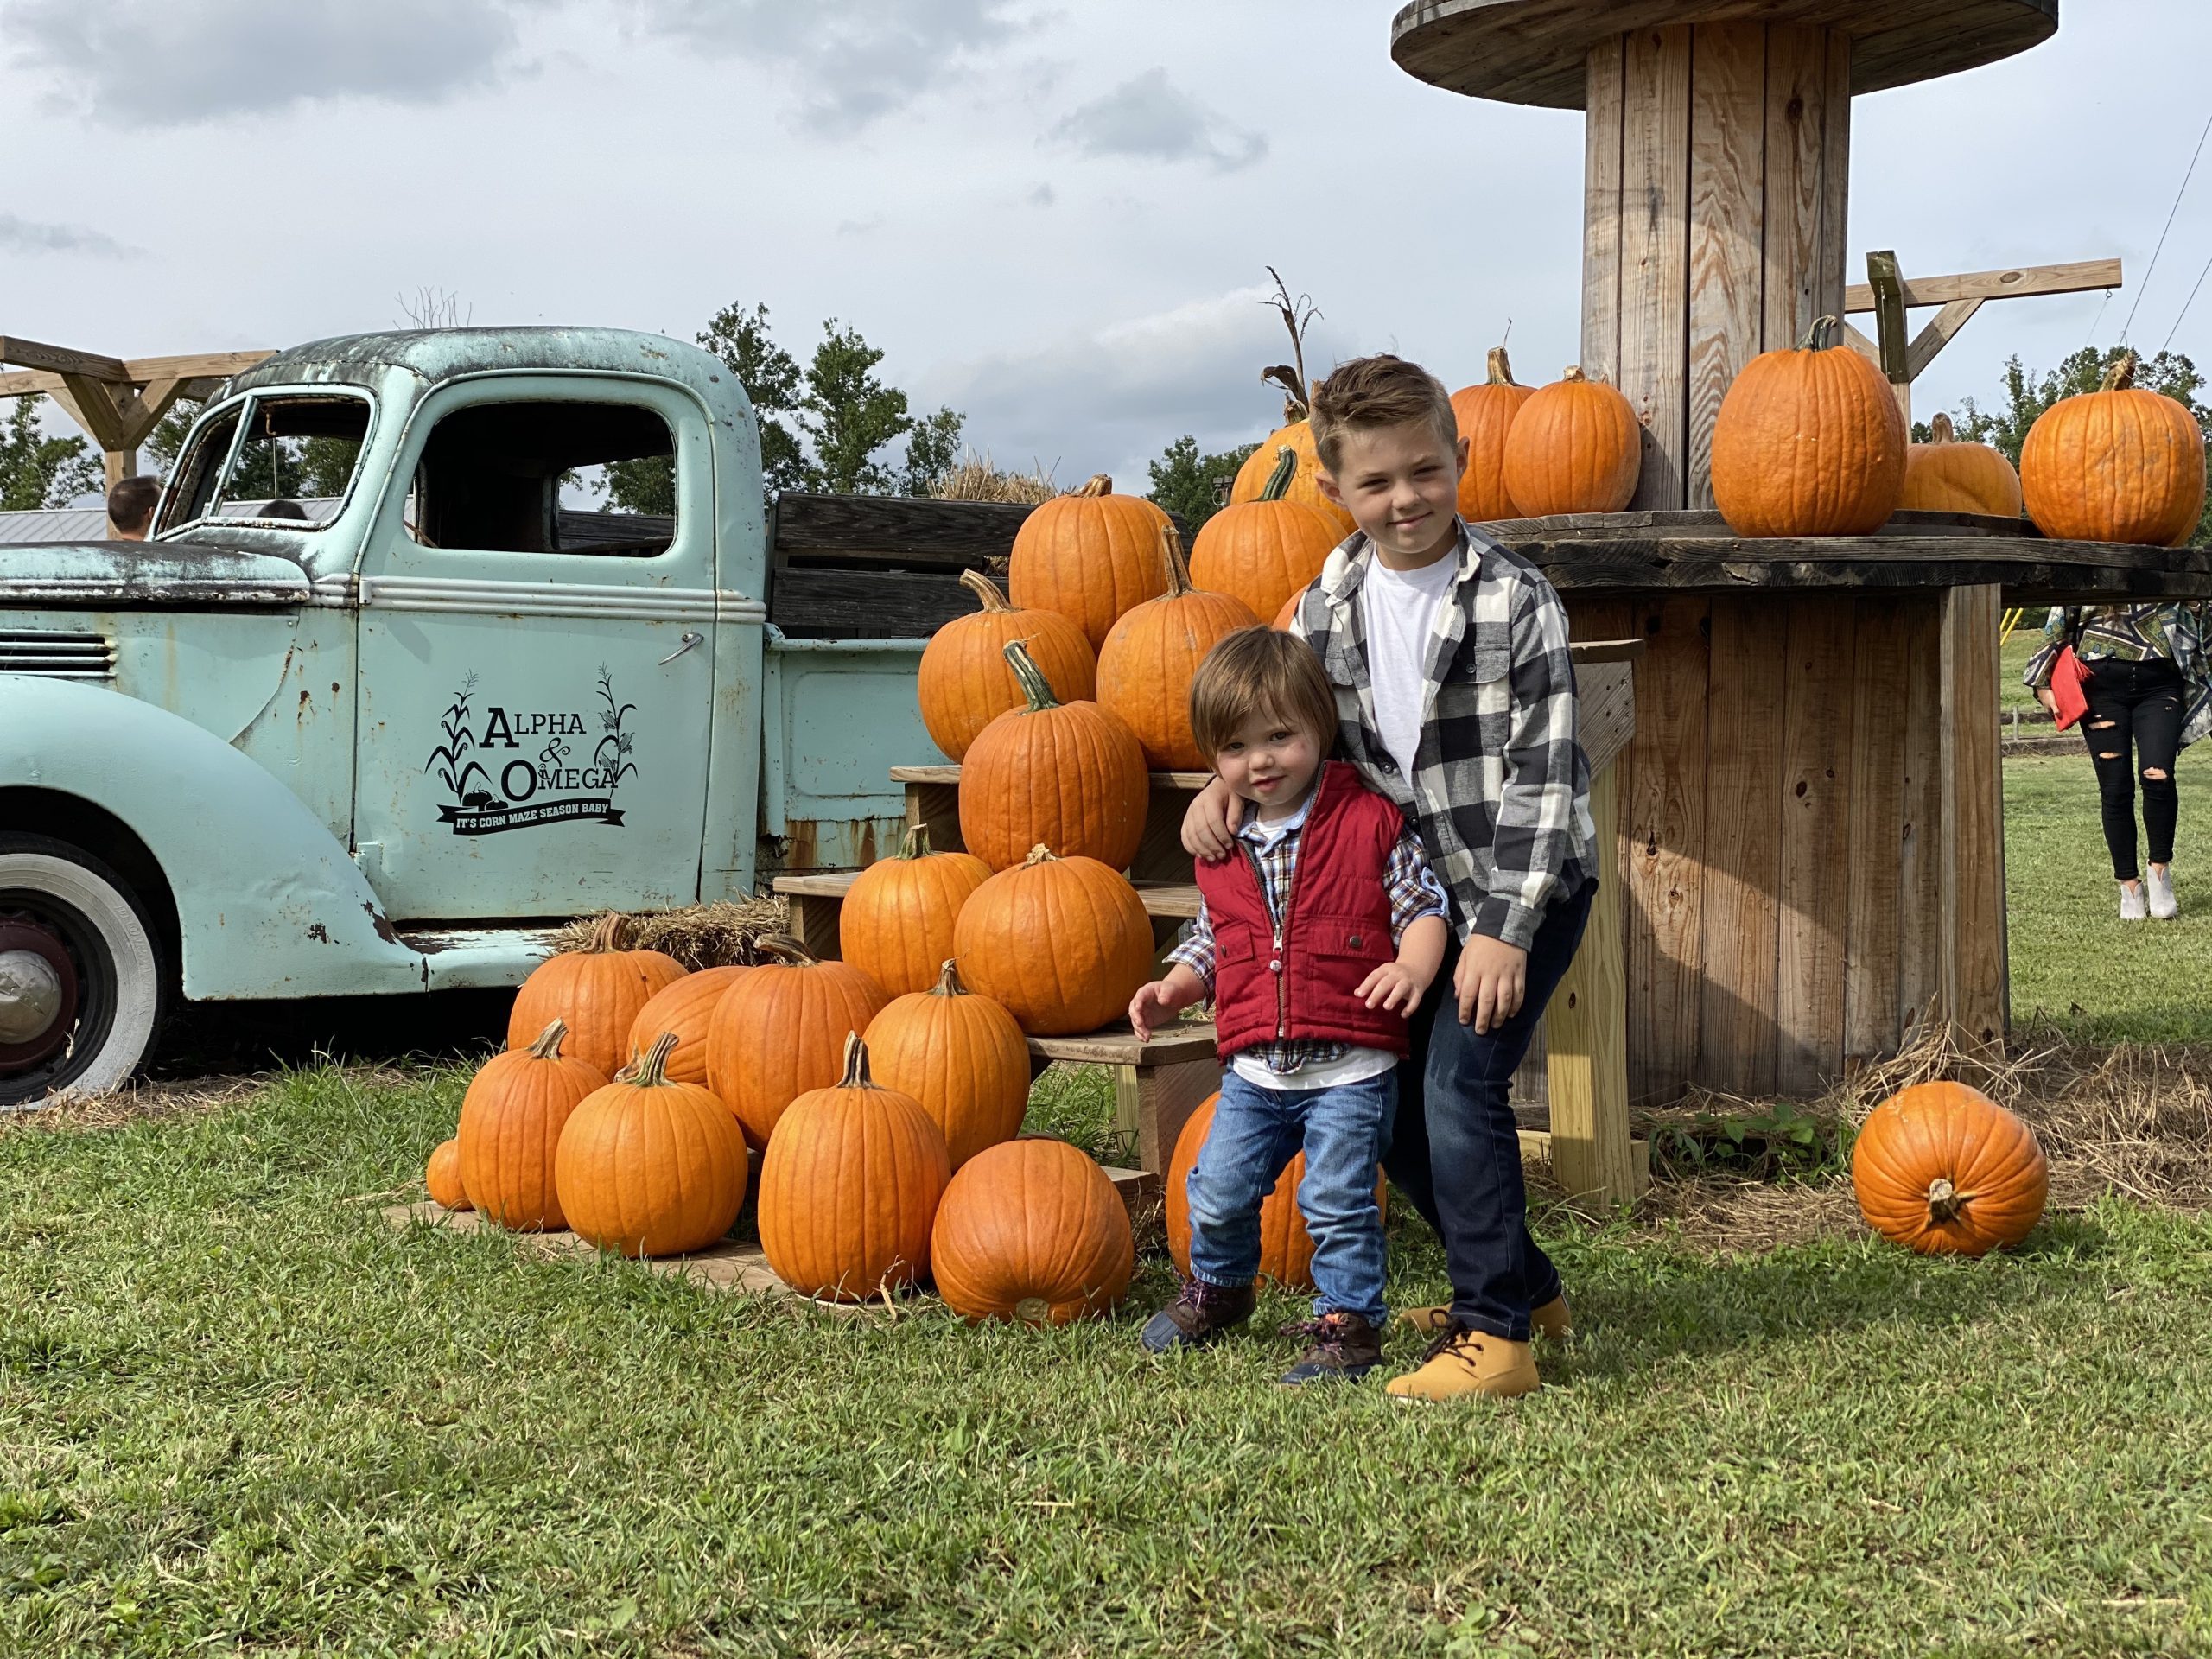 Corn Mazes in NC - Pumpkin Patches and Fall Things to Do - North Carolina - Alpha and Omega - fall family photos